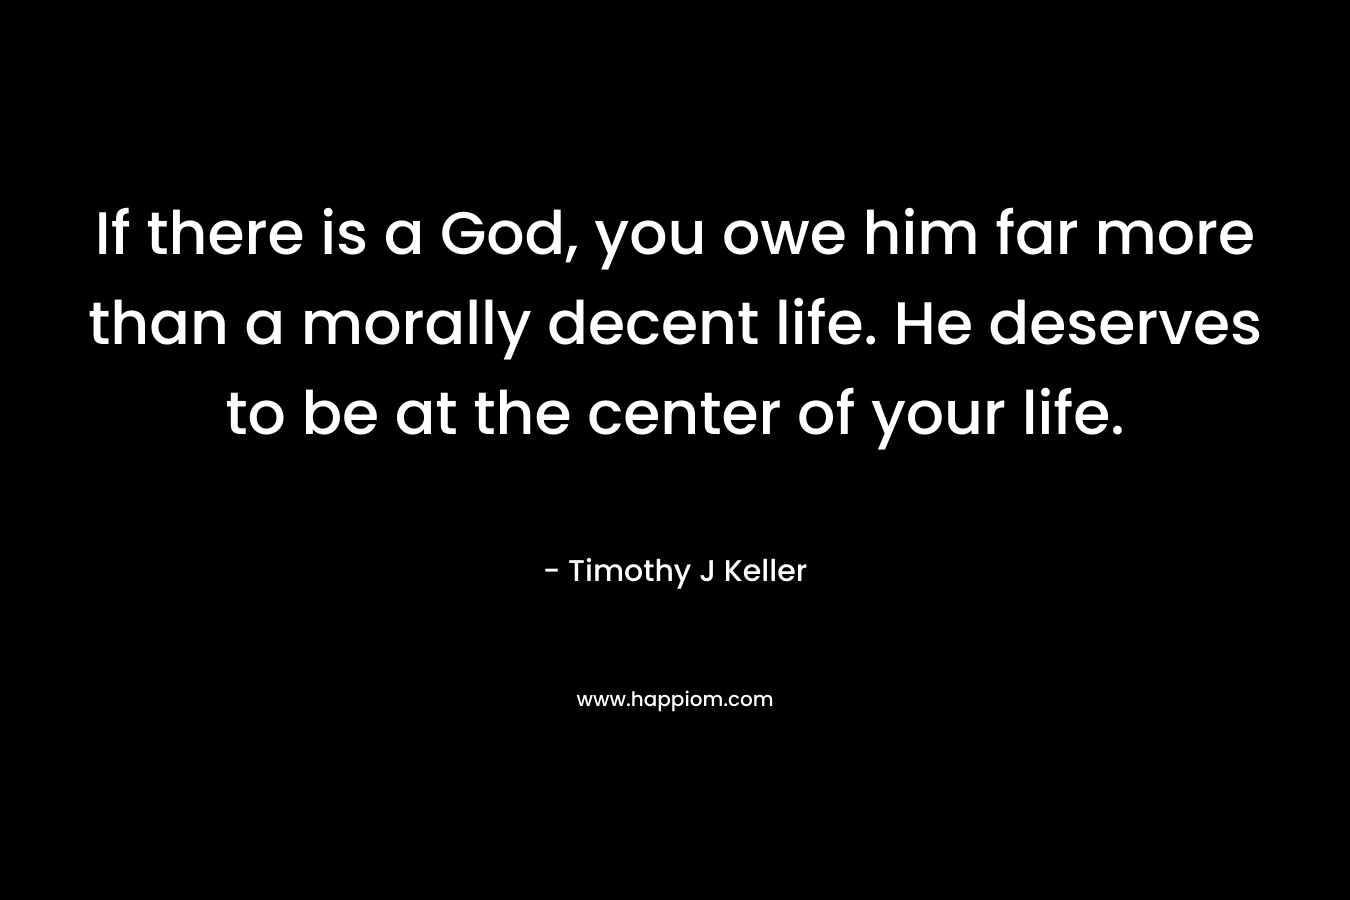 If there is a God, you owe him far more than a morally decent life. He deserves to be at the center of your life.